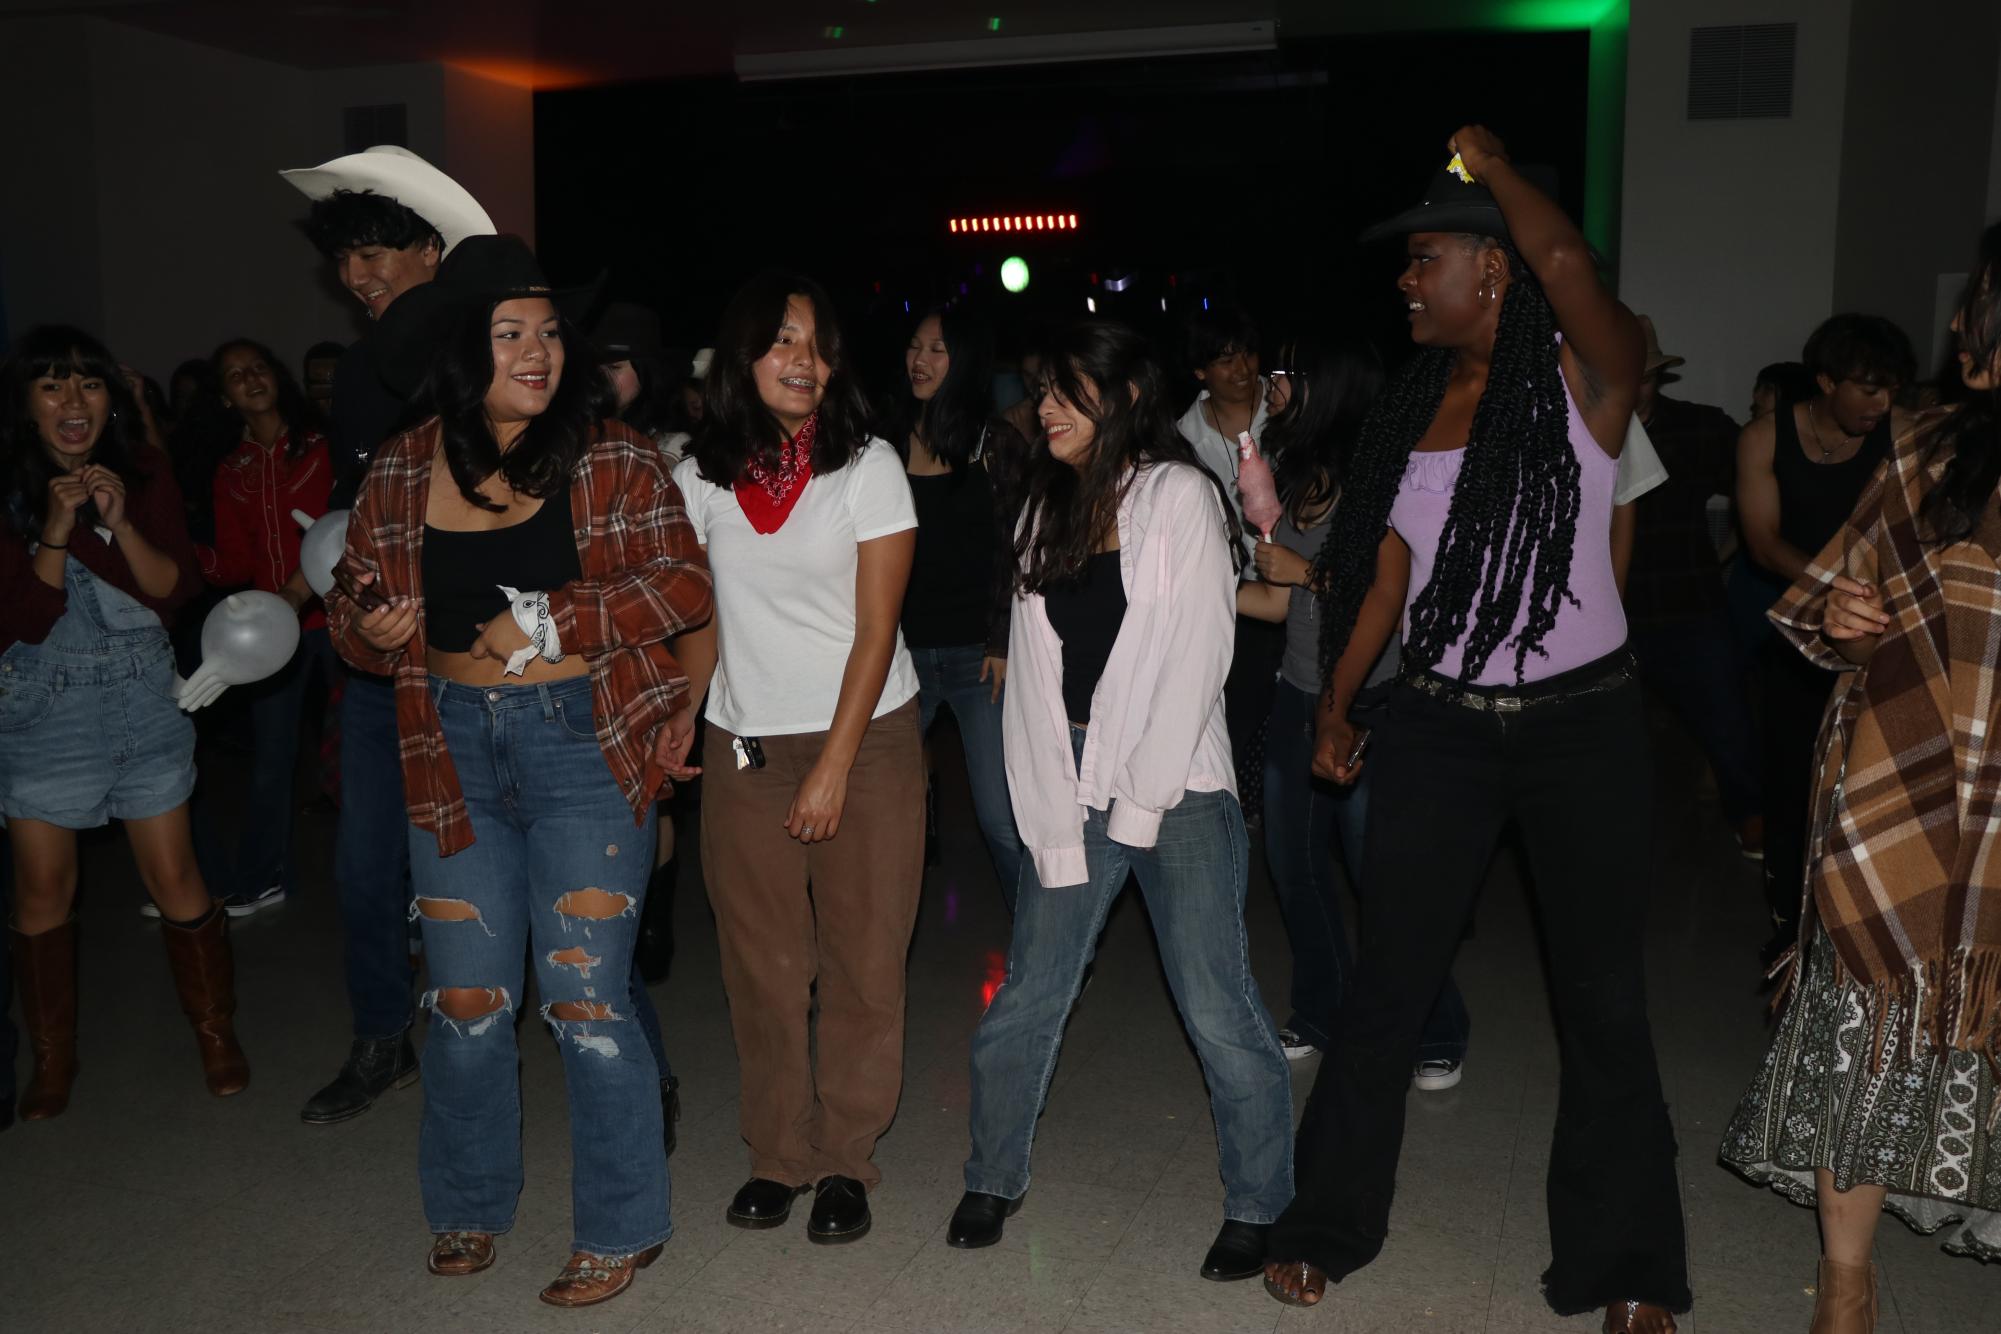 Nadia Taylor, Penelope Montes, Paola Aldana, and KaRisma Lockhart had a Grand Ole Time kicking their heels up at MECAs Wild West themed Back to School Dance! 